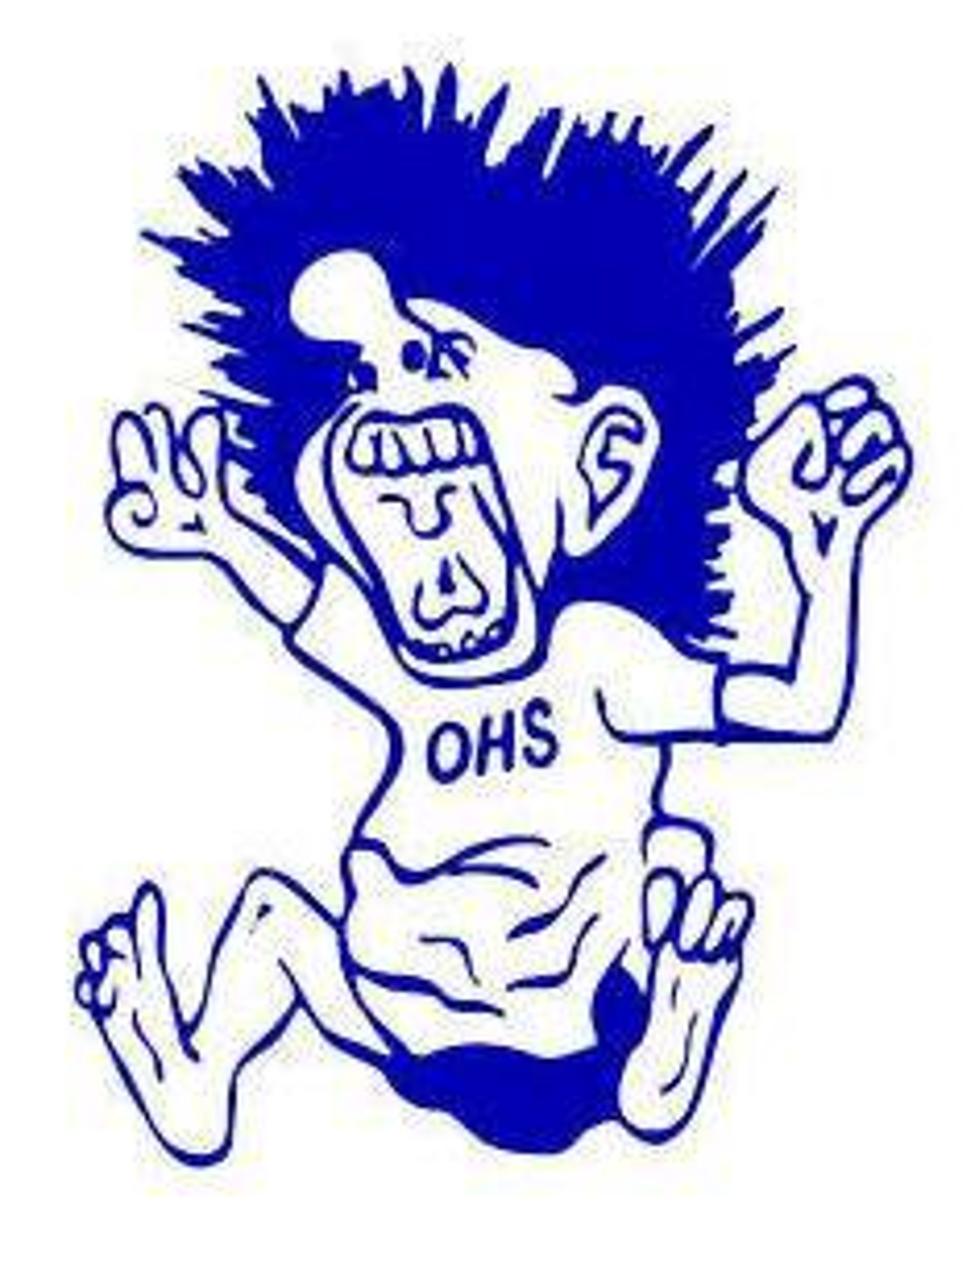 [POLL] Should This HS Mascot Be on a License Plate?